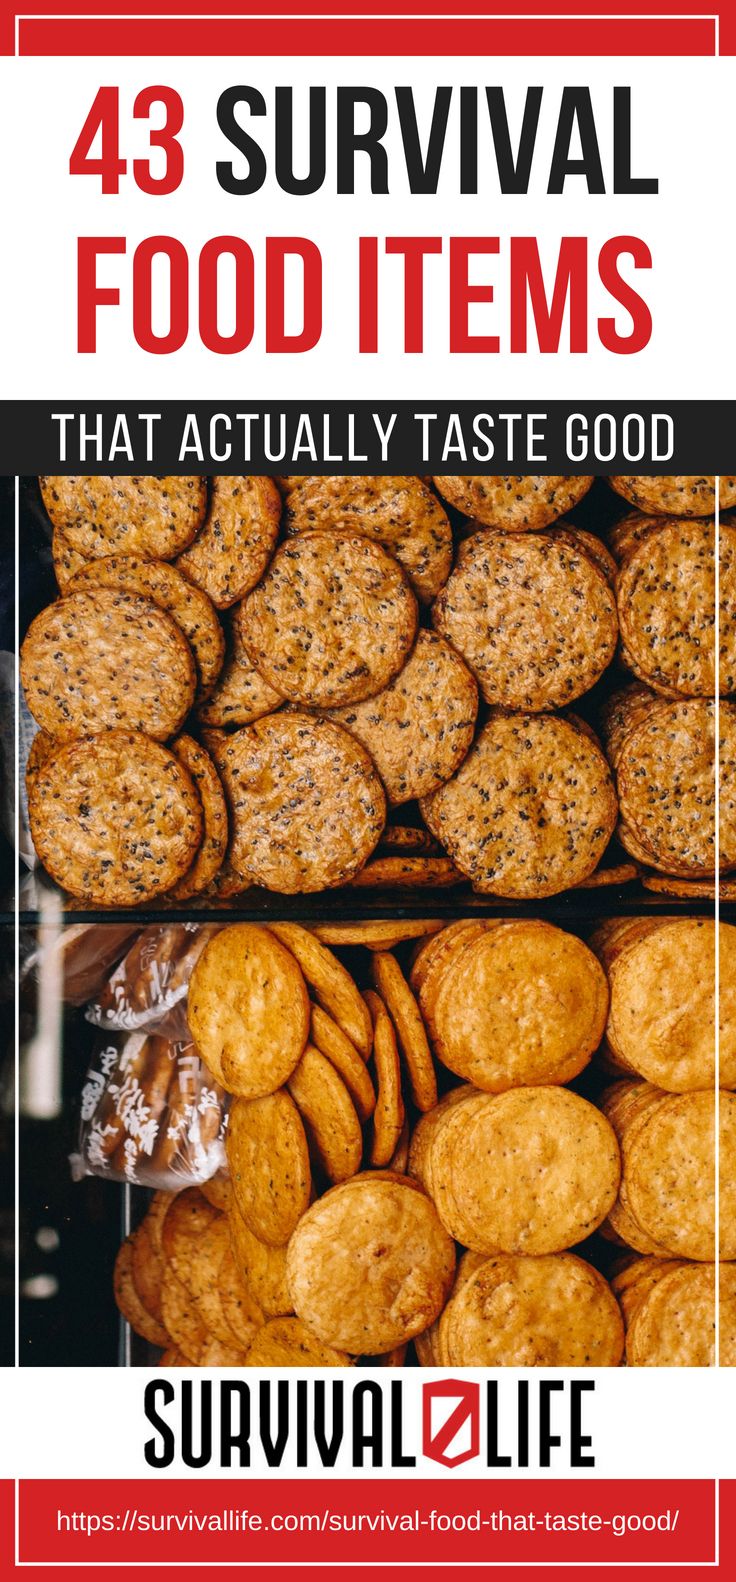 Placard | 43 Survival Food Items That Actually Taste Good